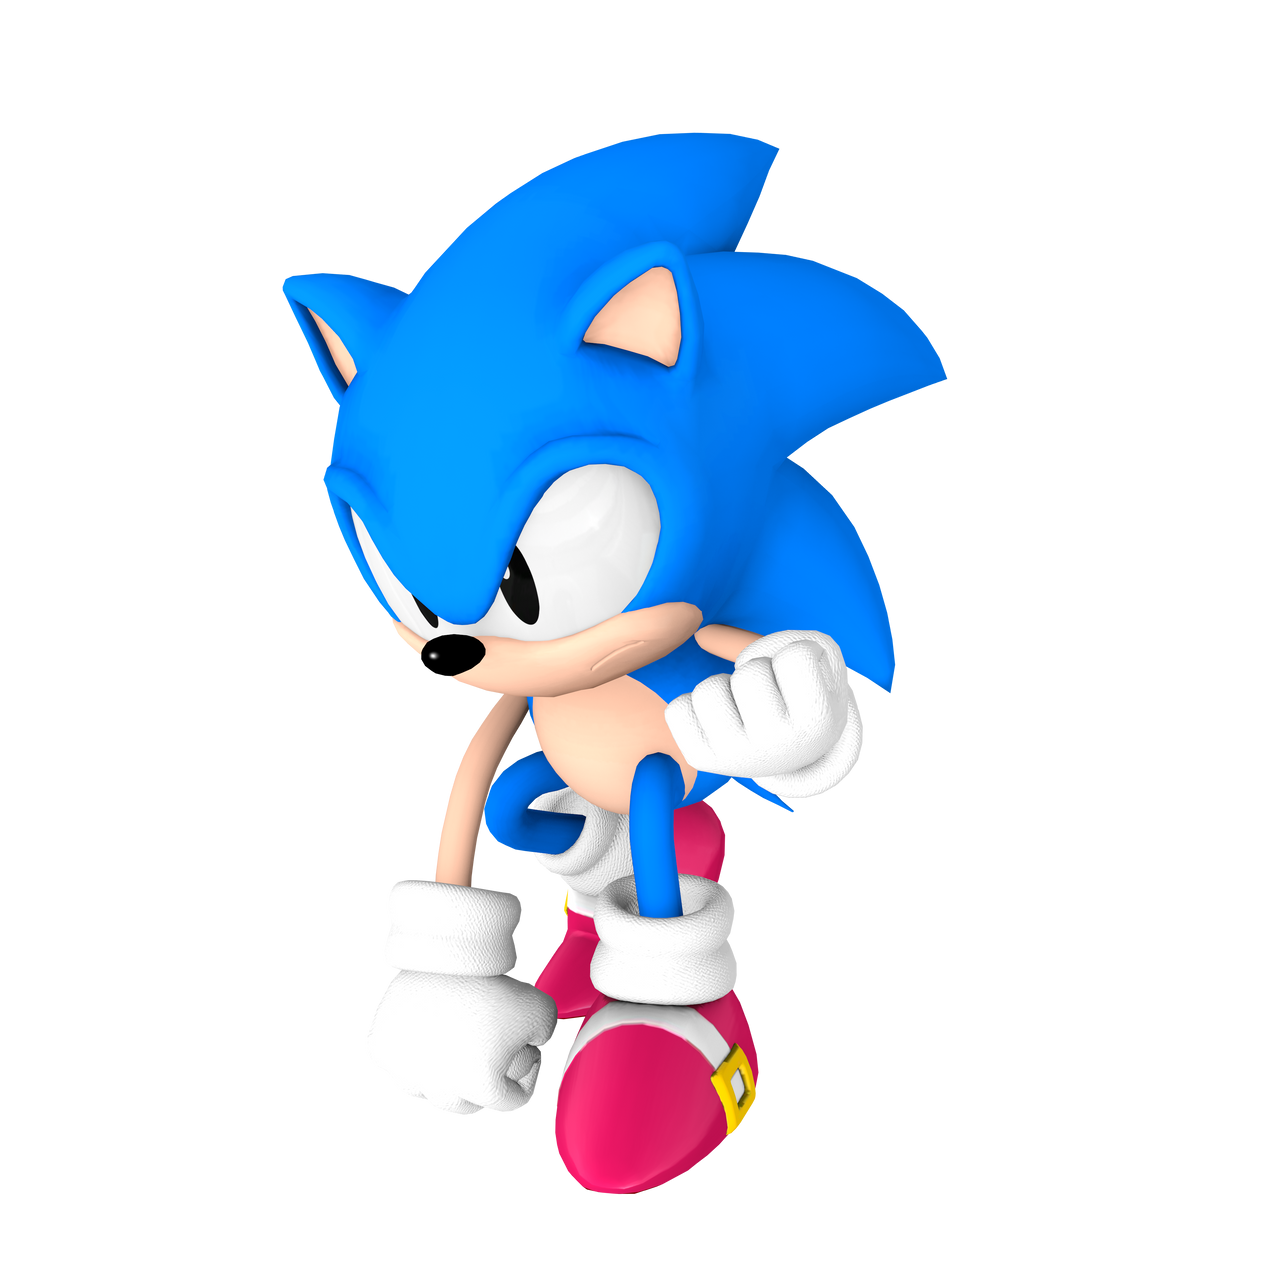 27 Nov - Sonic Classic Collection Ds - Free Transparent PNG Clipart Images  Download